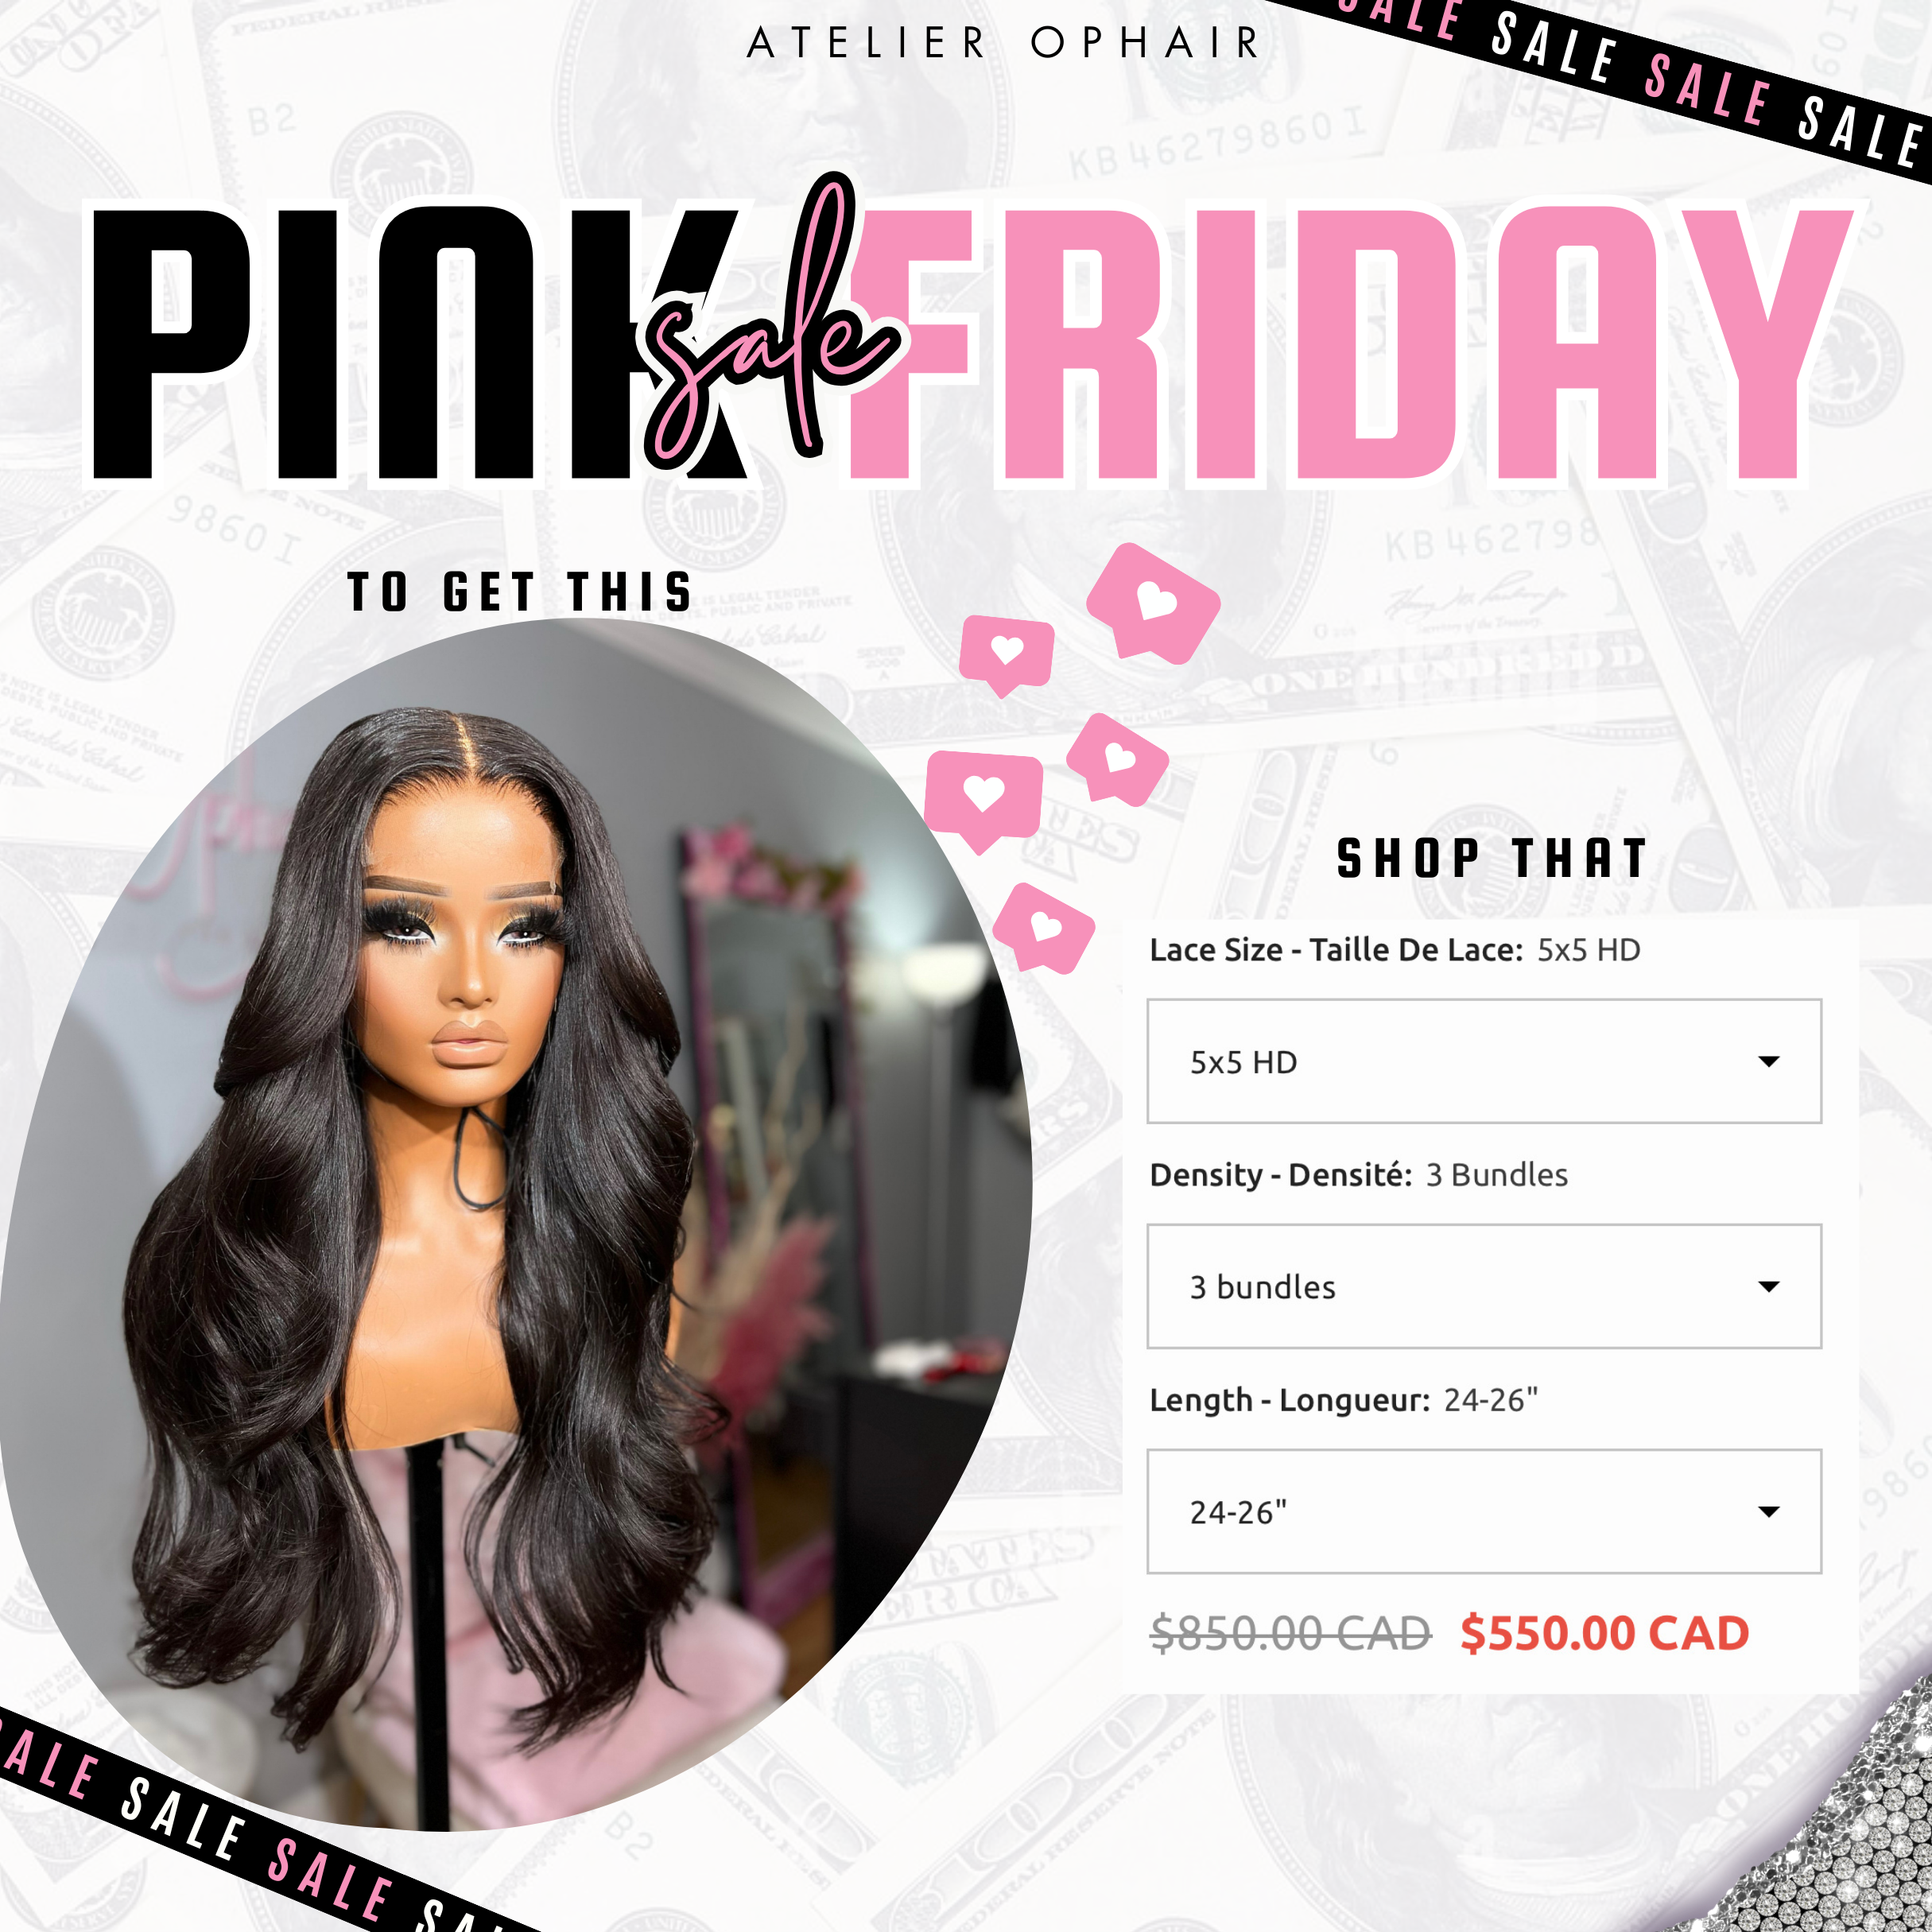 Pink Friday - Raw classic unit Pre-Order - All sizes, 5 lengths